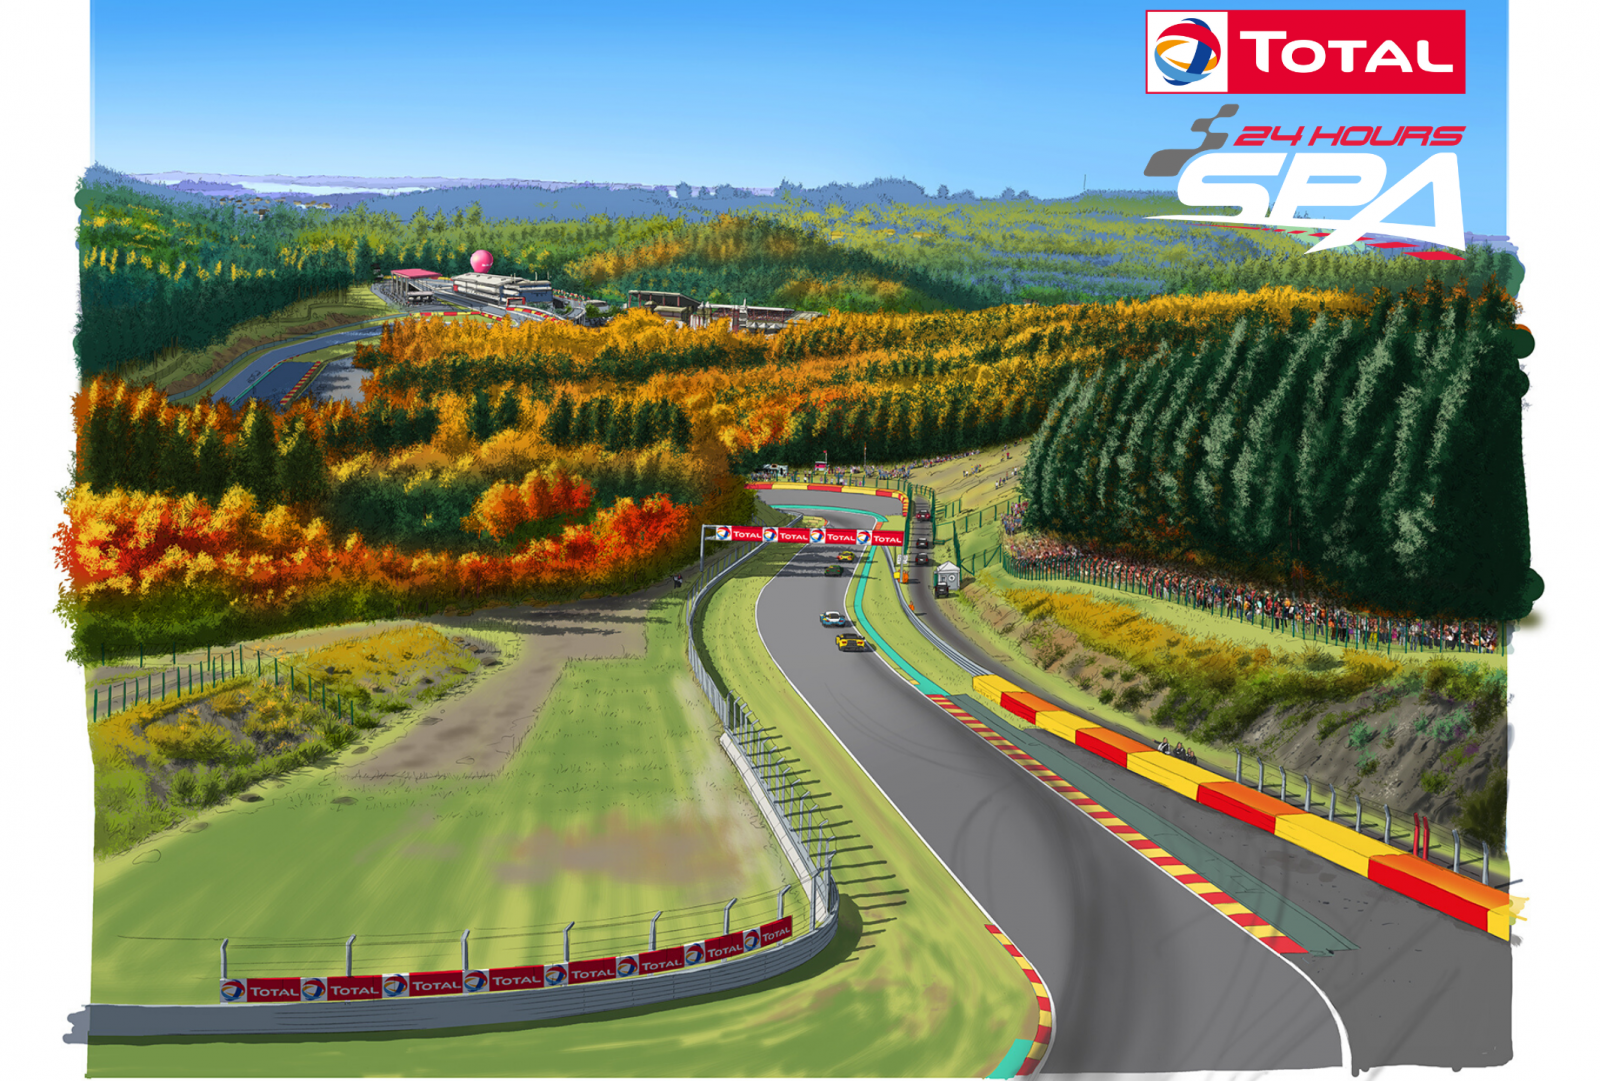  Once-in-a-lifetime 25-hour edition for the Total 24 Hours of Spa